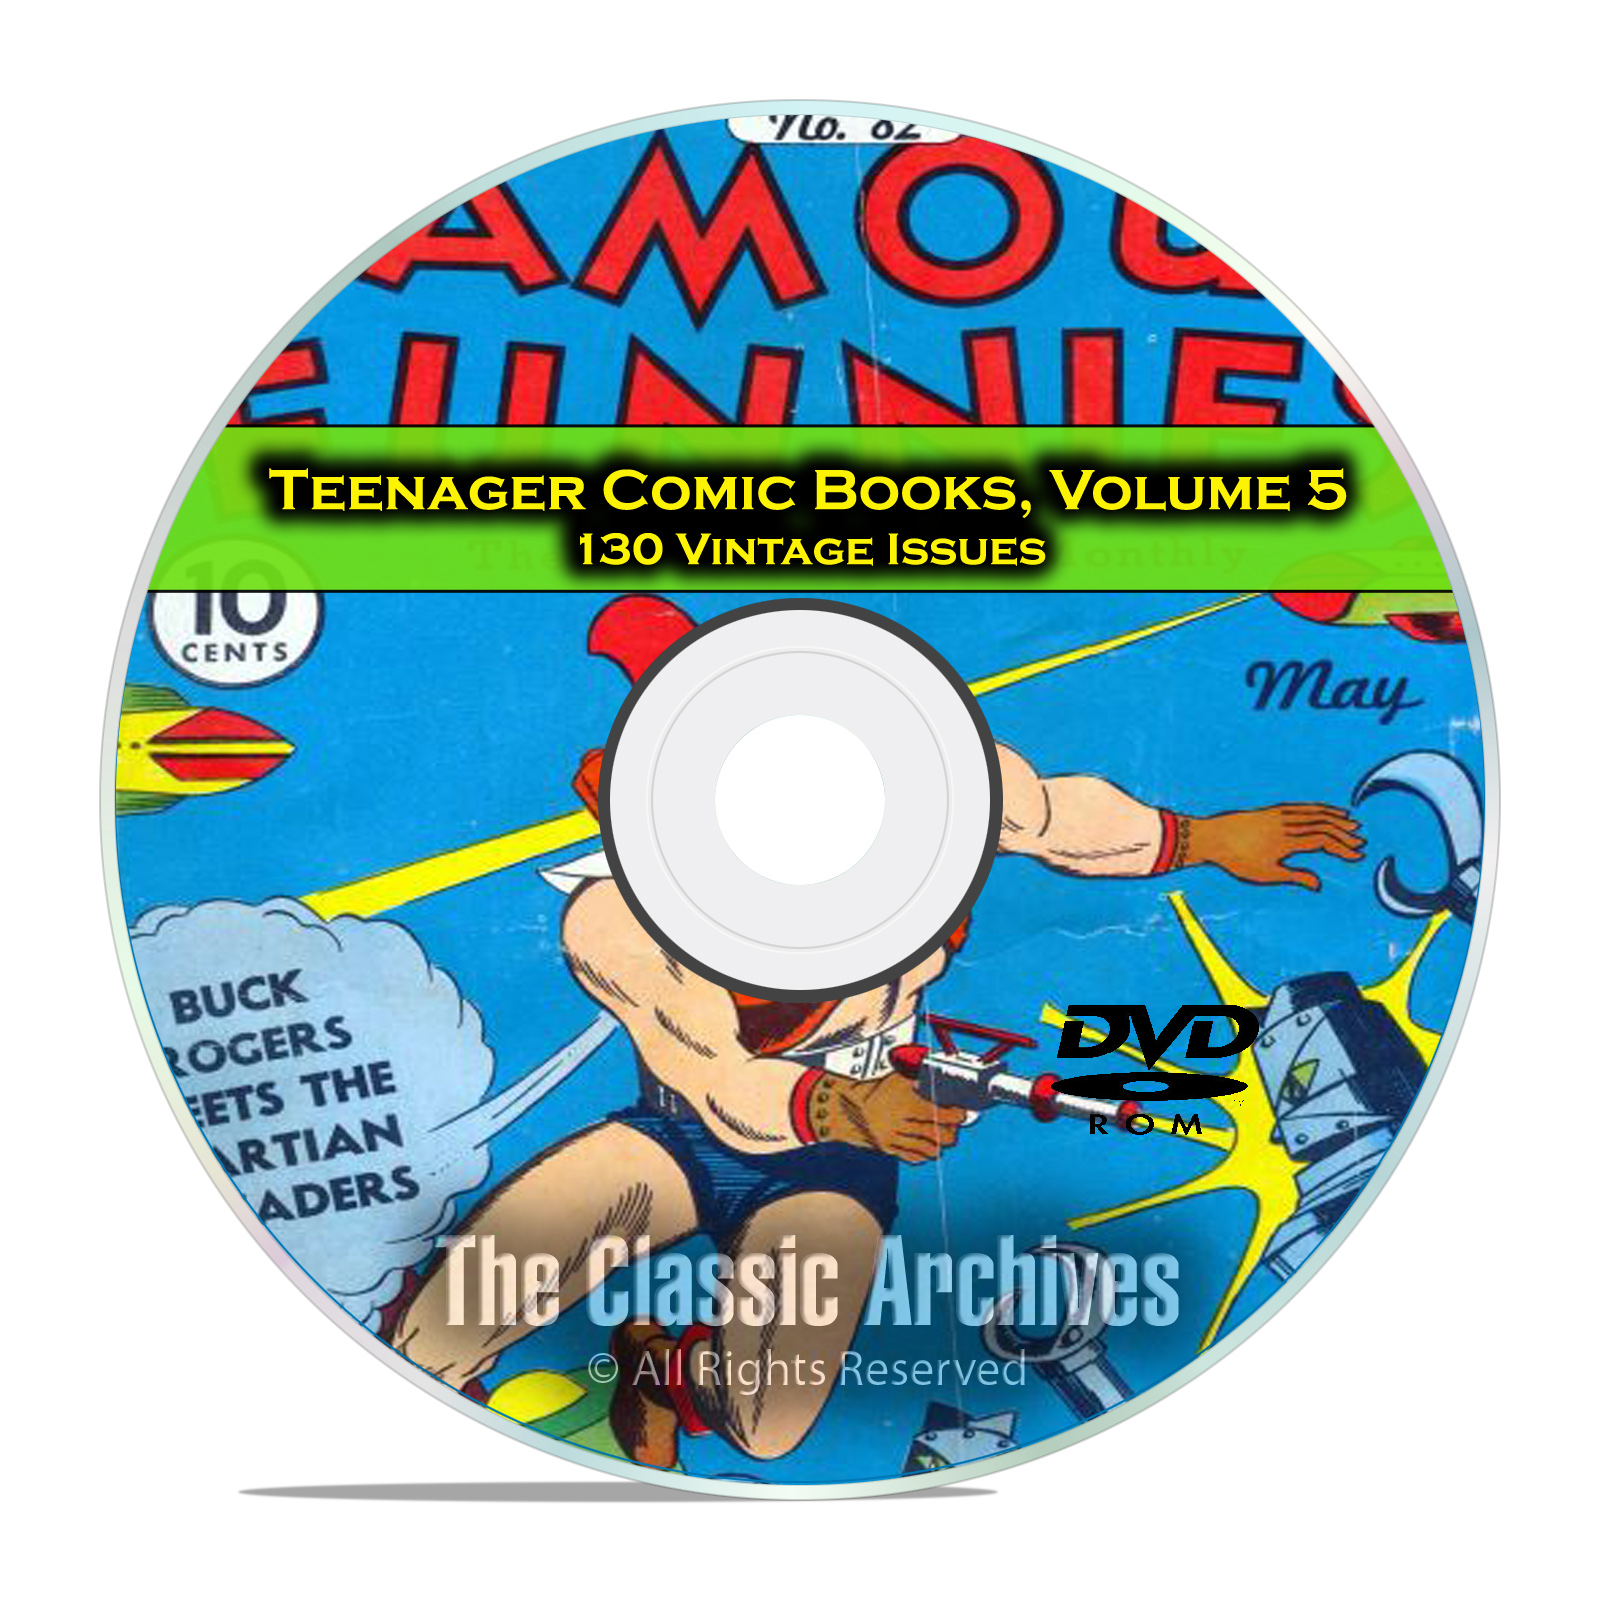 Teenager Comic Books, Vol 5, Famous Funnies, 130 Issues Golden Age DVD